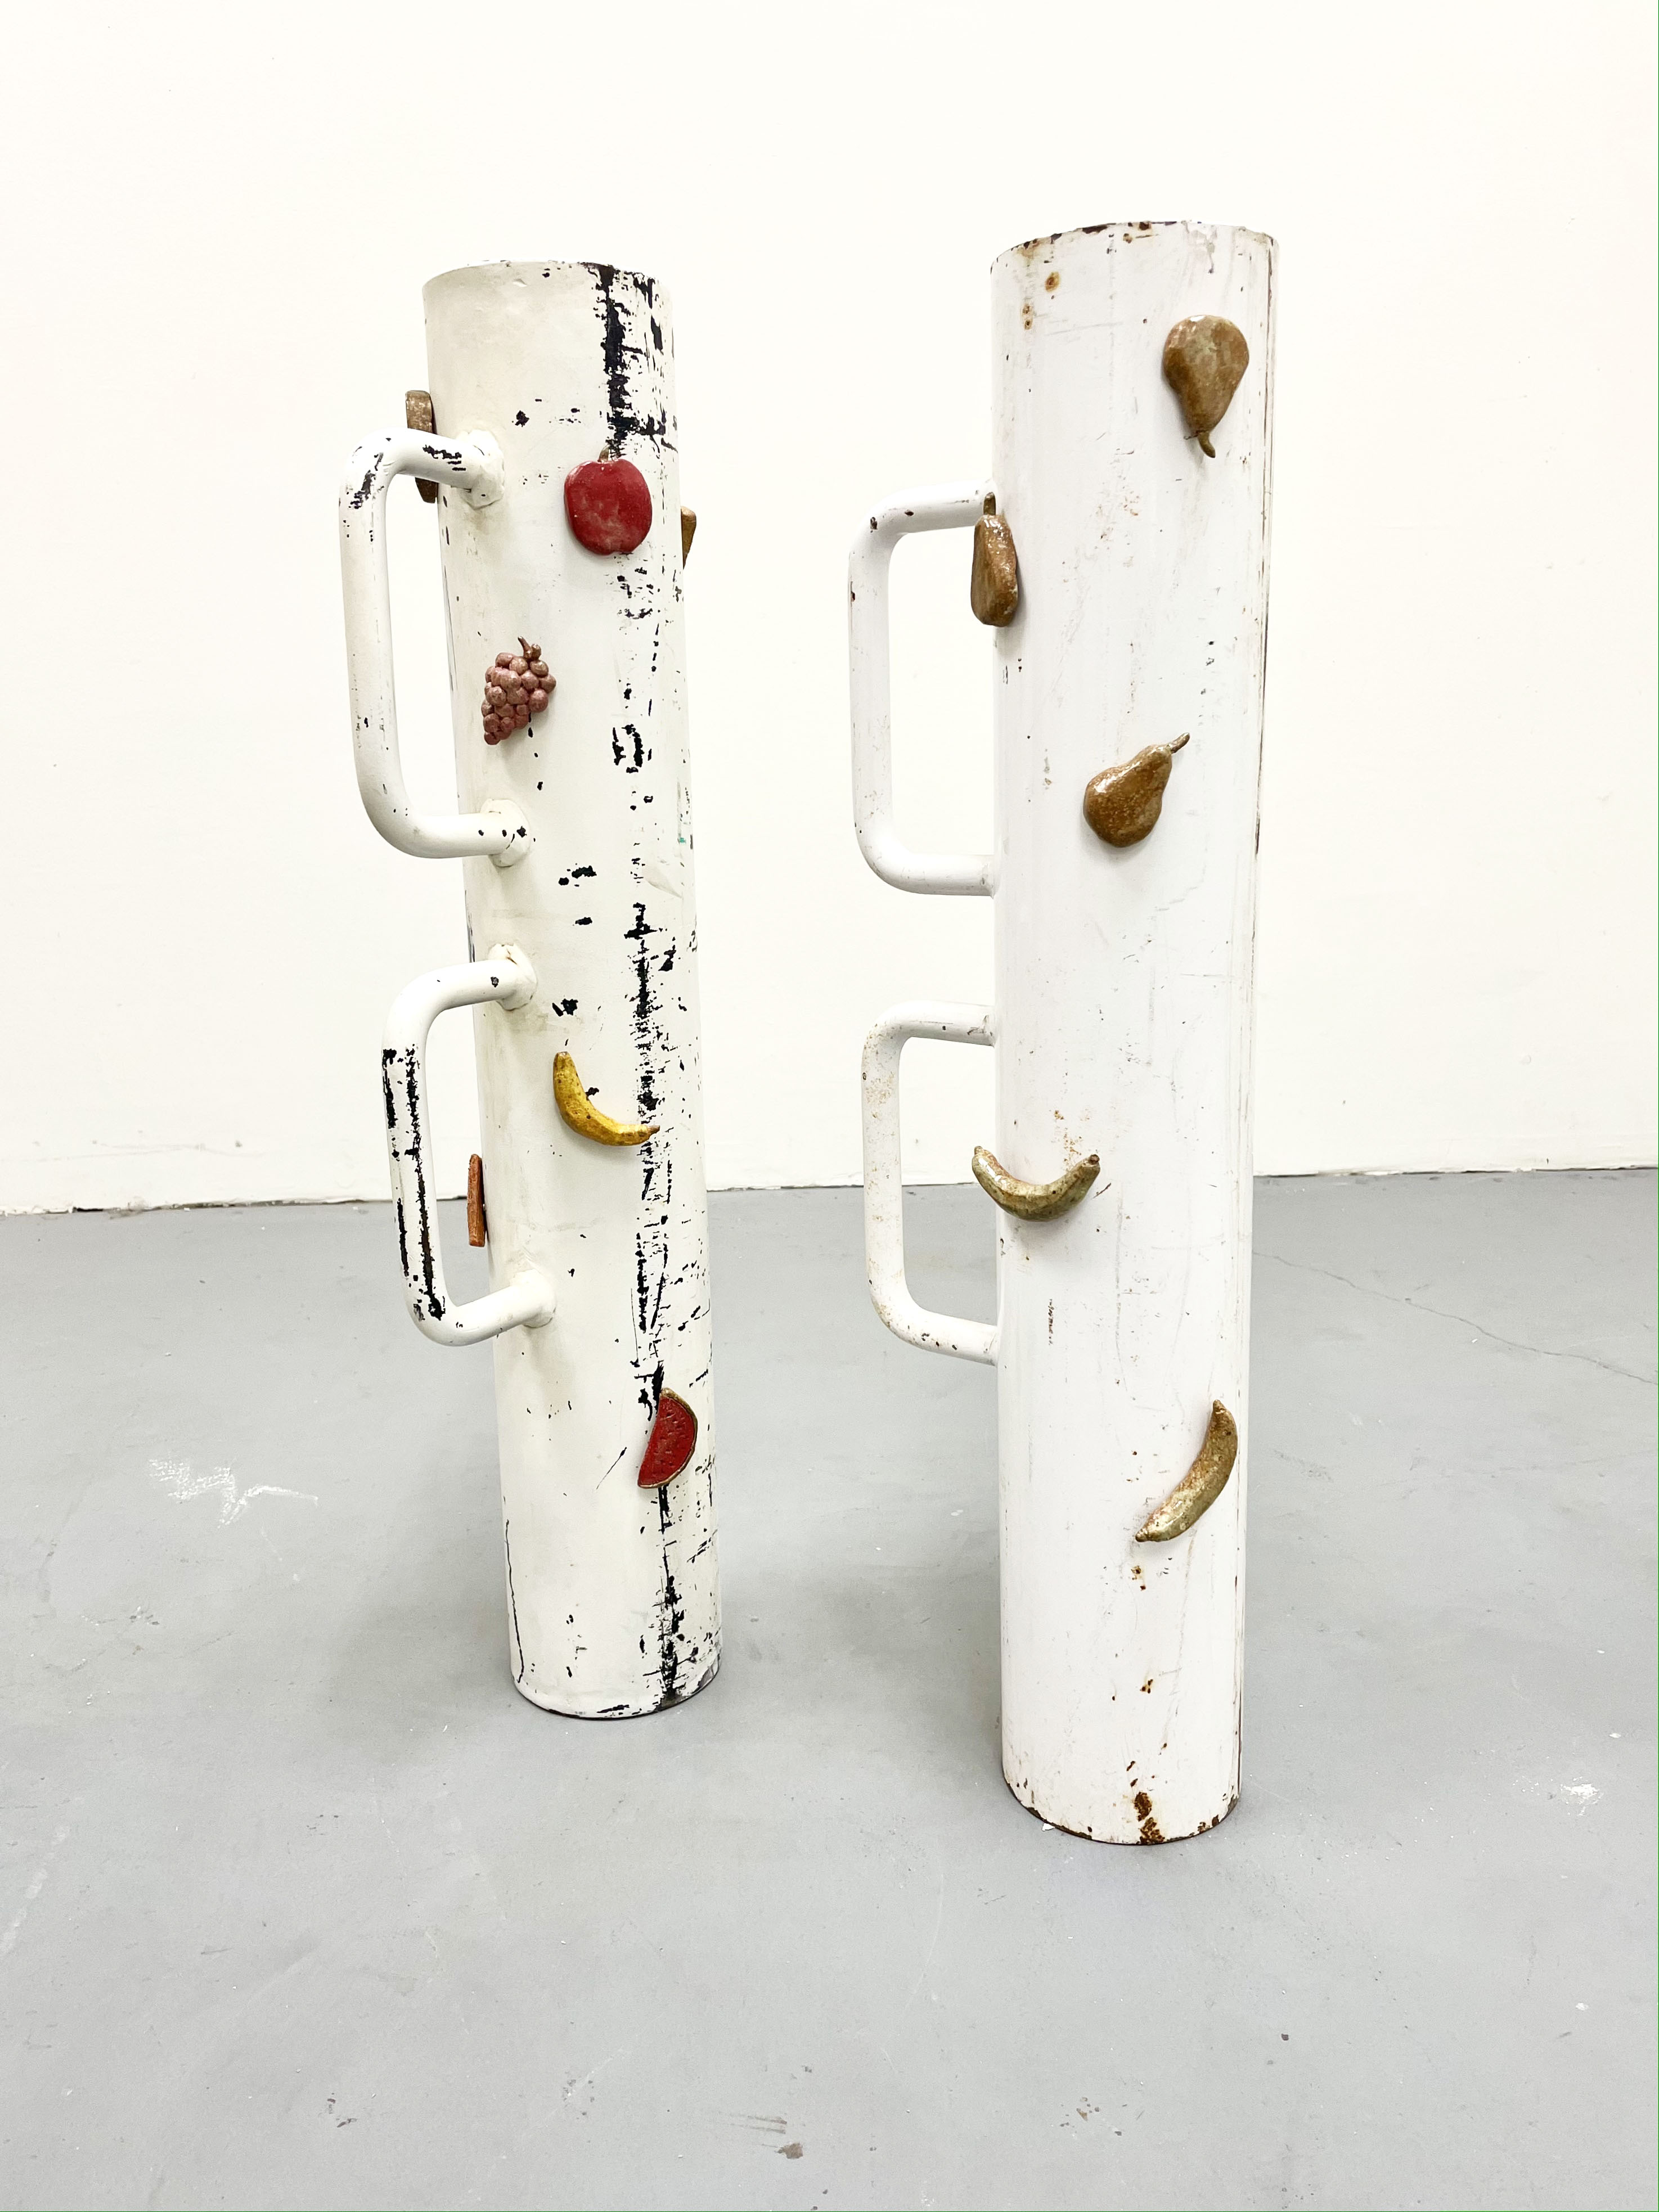 A Fruited Plane - A sculpture by Brian Dario, Featuring two paint chipped battering rams standing upright with ceramic fruit magnets attatched to them